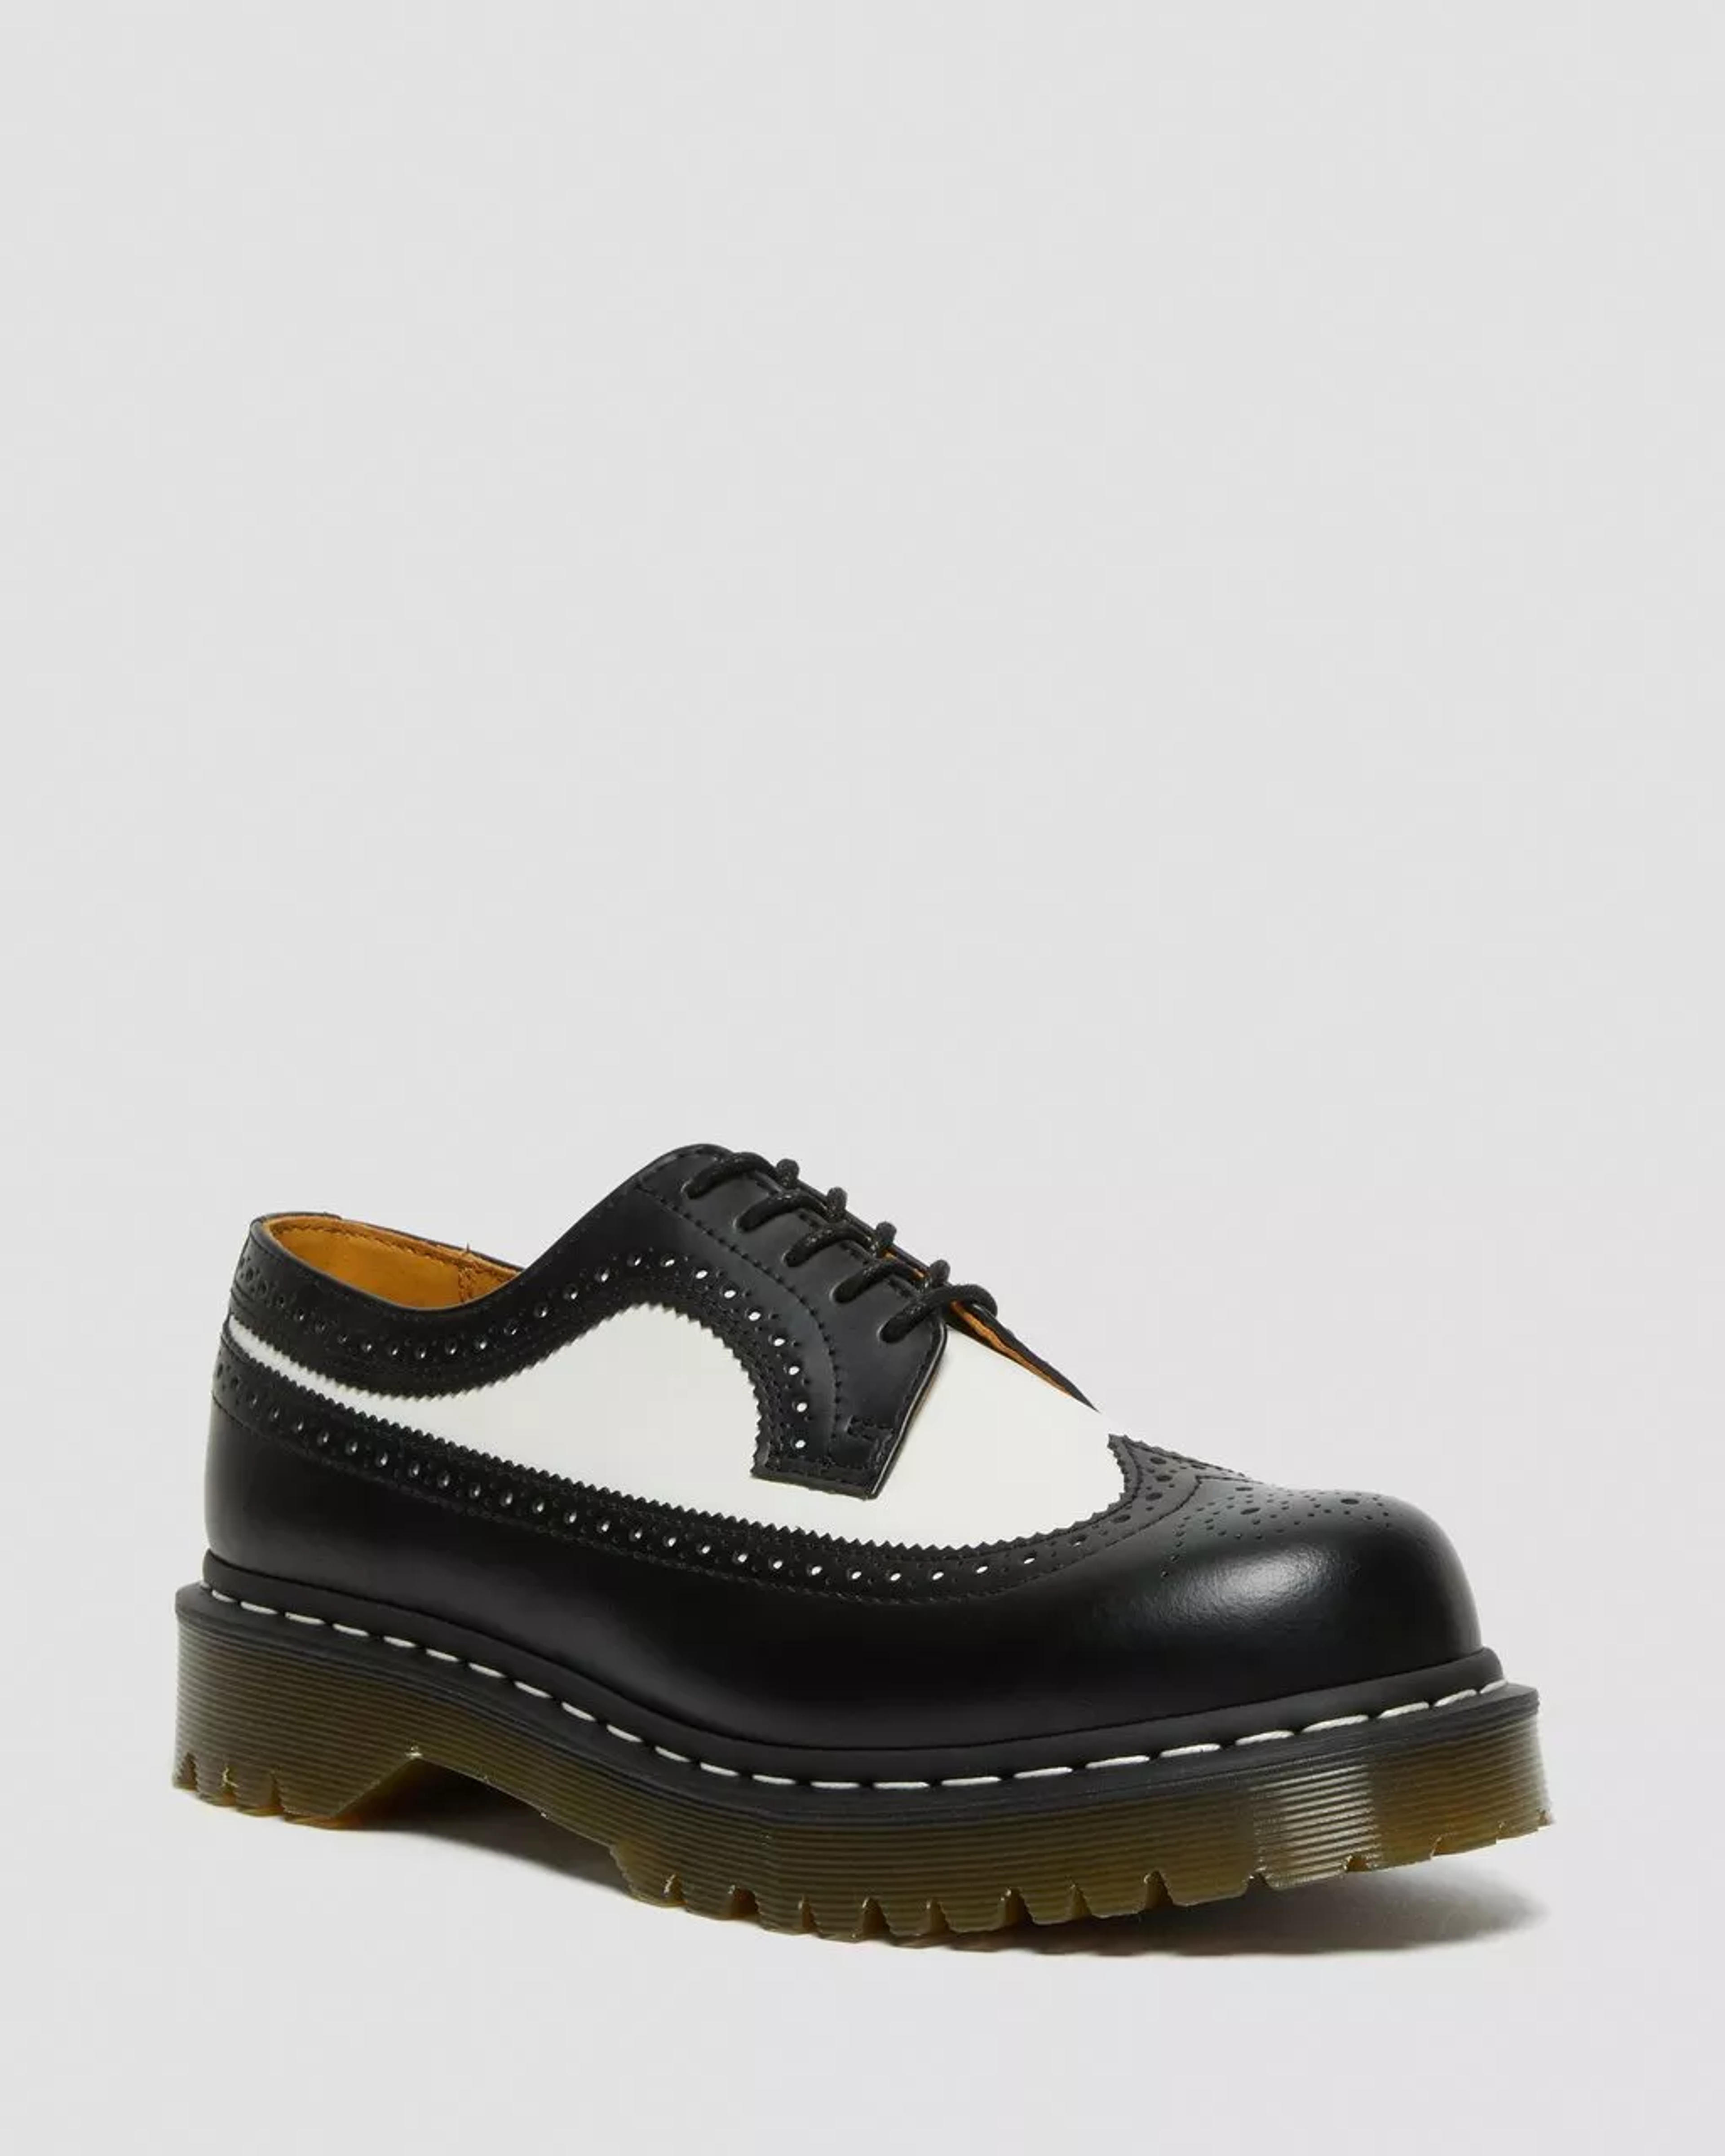 3989 Bex Smooth Leather Brogue Shoes in Black | Dr. Martens